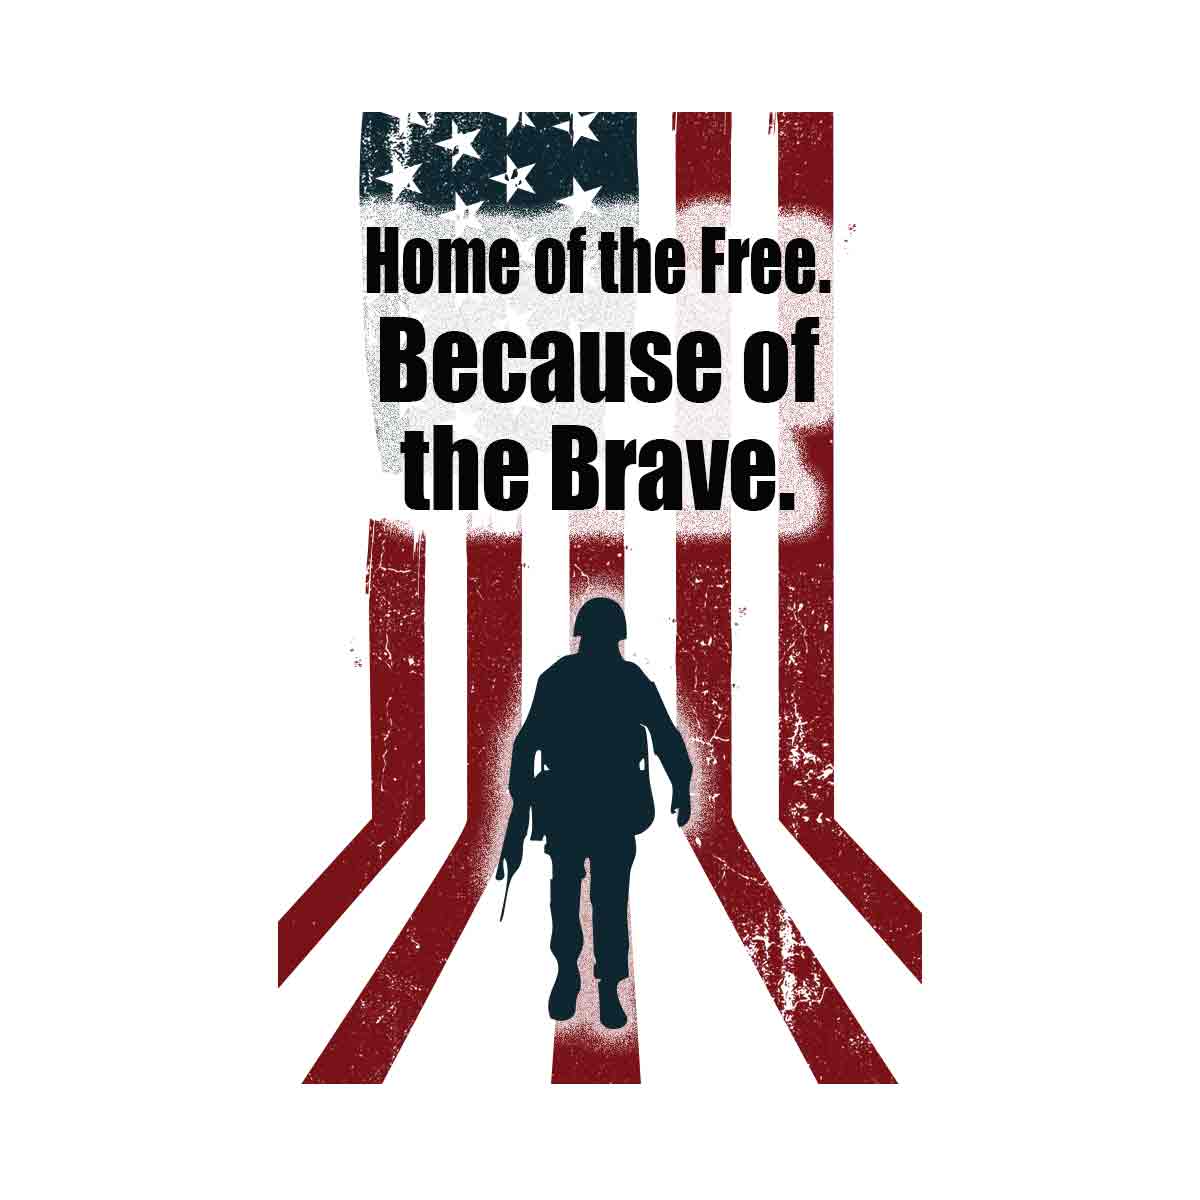 Home of the free